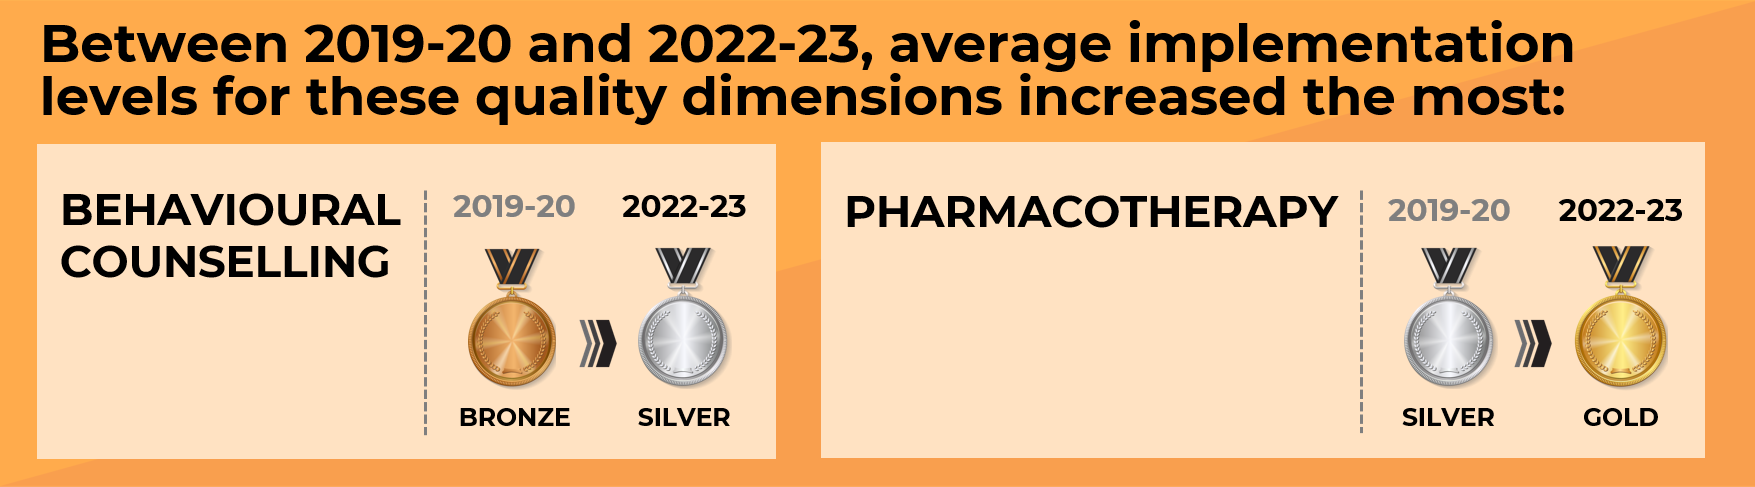 Between 2019-20 and 2022-23, implementation levels increased the most for behavioural counselling which went from bronze to silver, and for pharmacotherapy, which went from silver to gold.